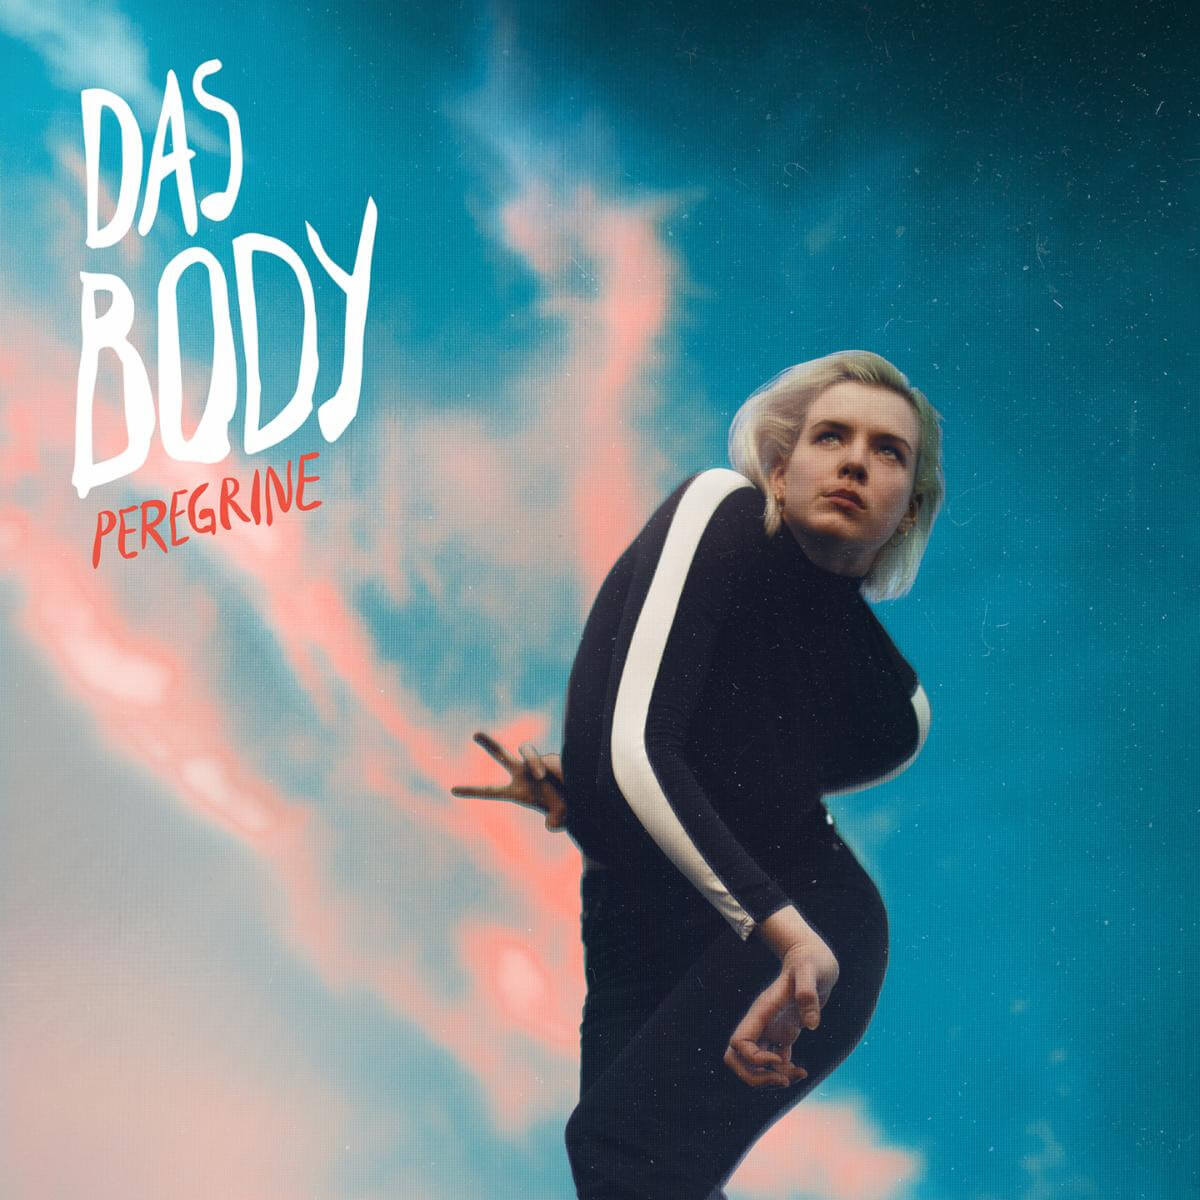 "Scared" by Das Body is Northern Transmissions Song of the Day